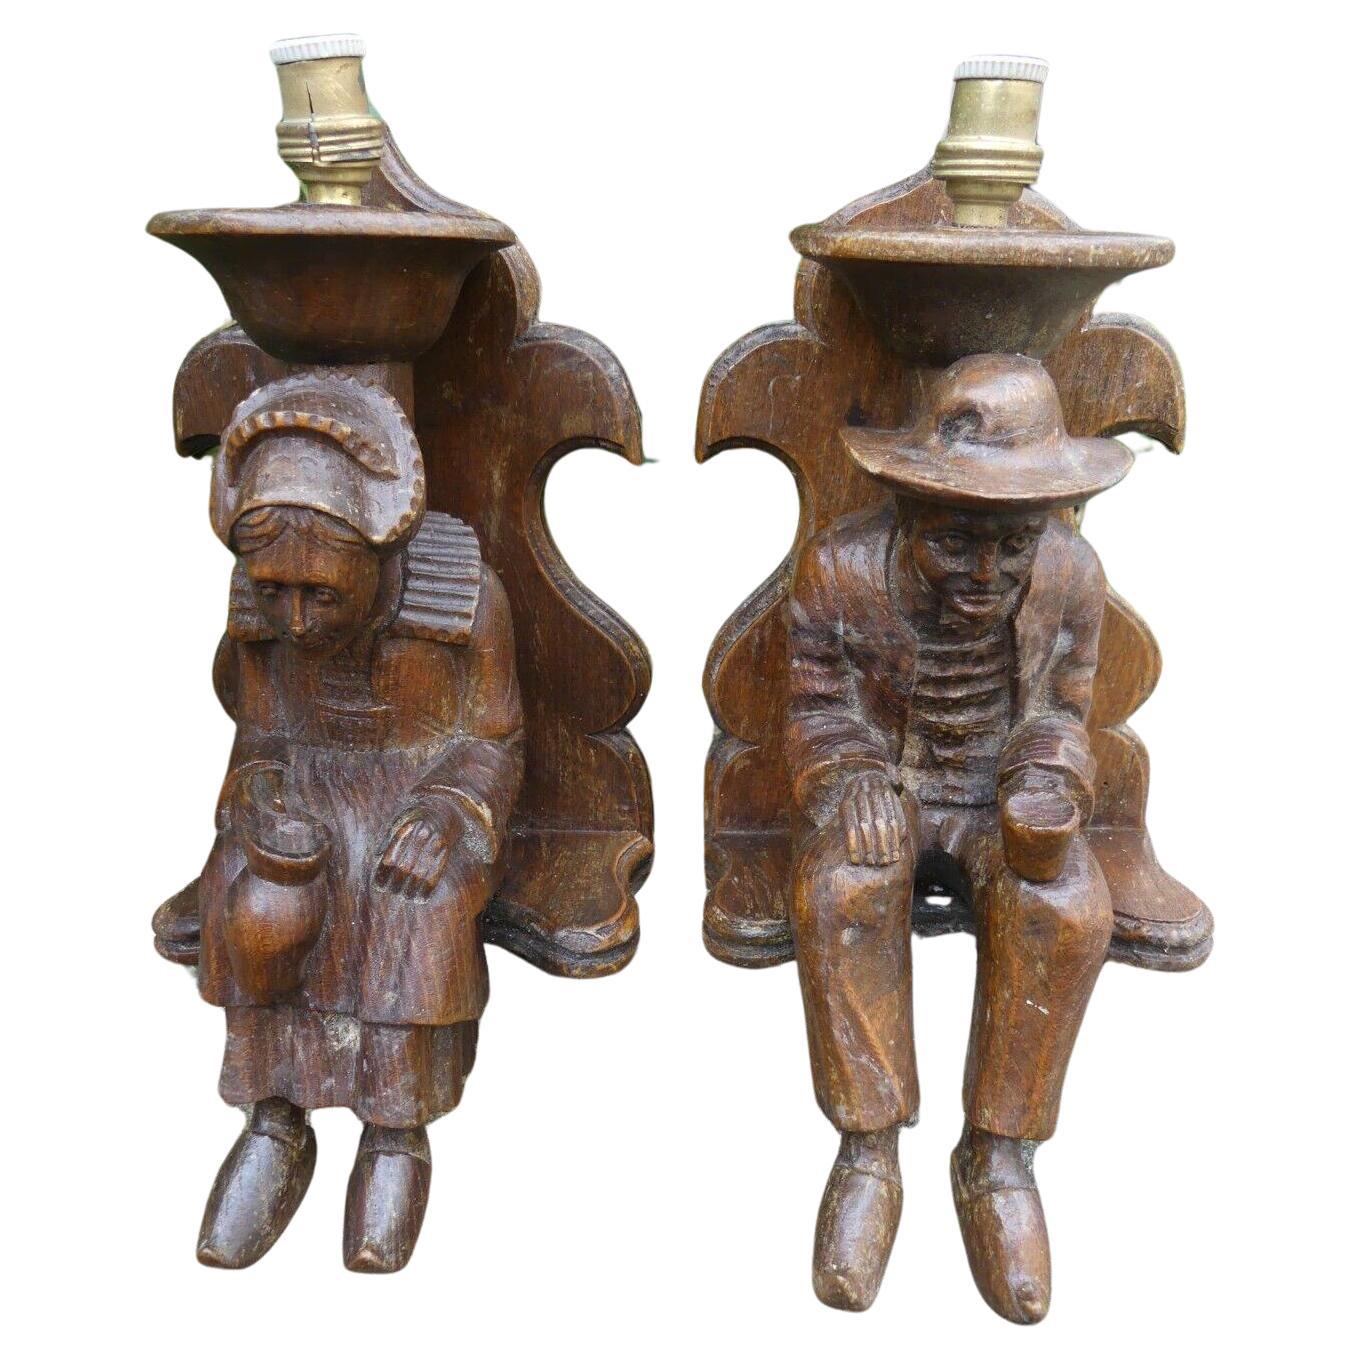 c1920's French Folk Art/ Carved Wood Figural Breton Couple Wall Sconces